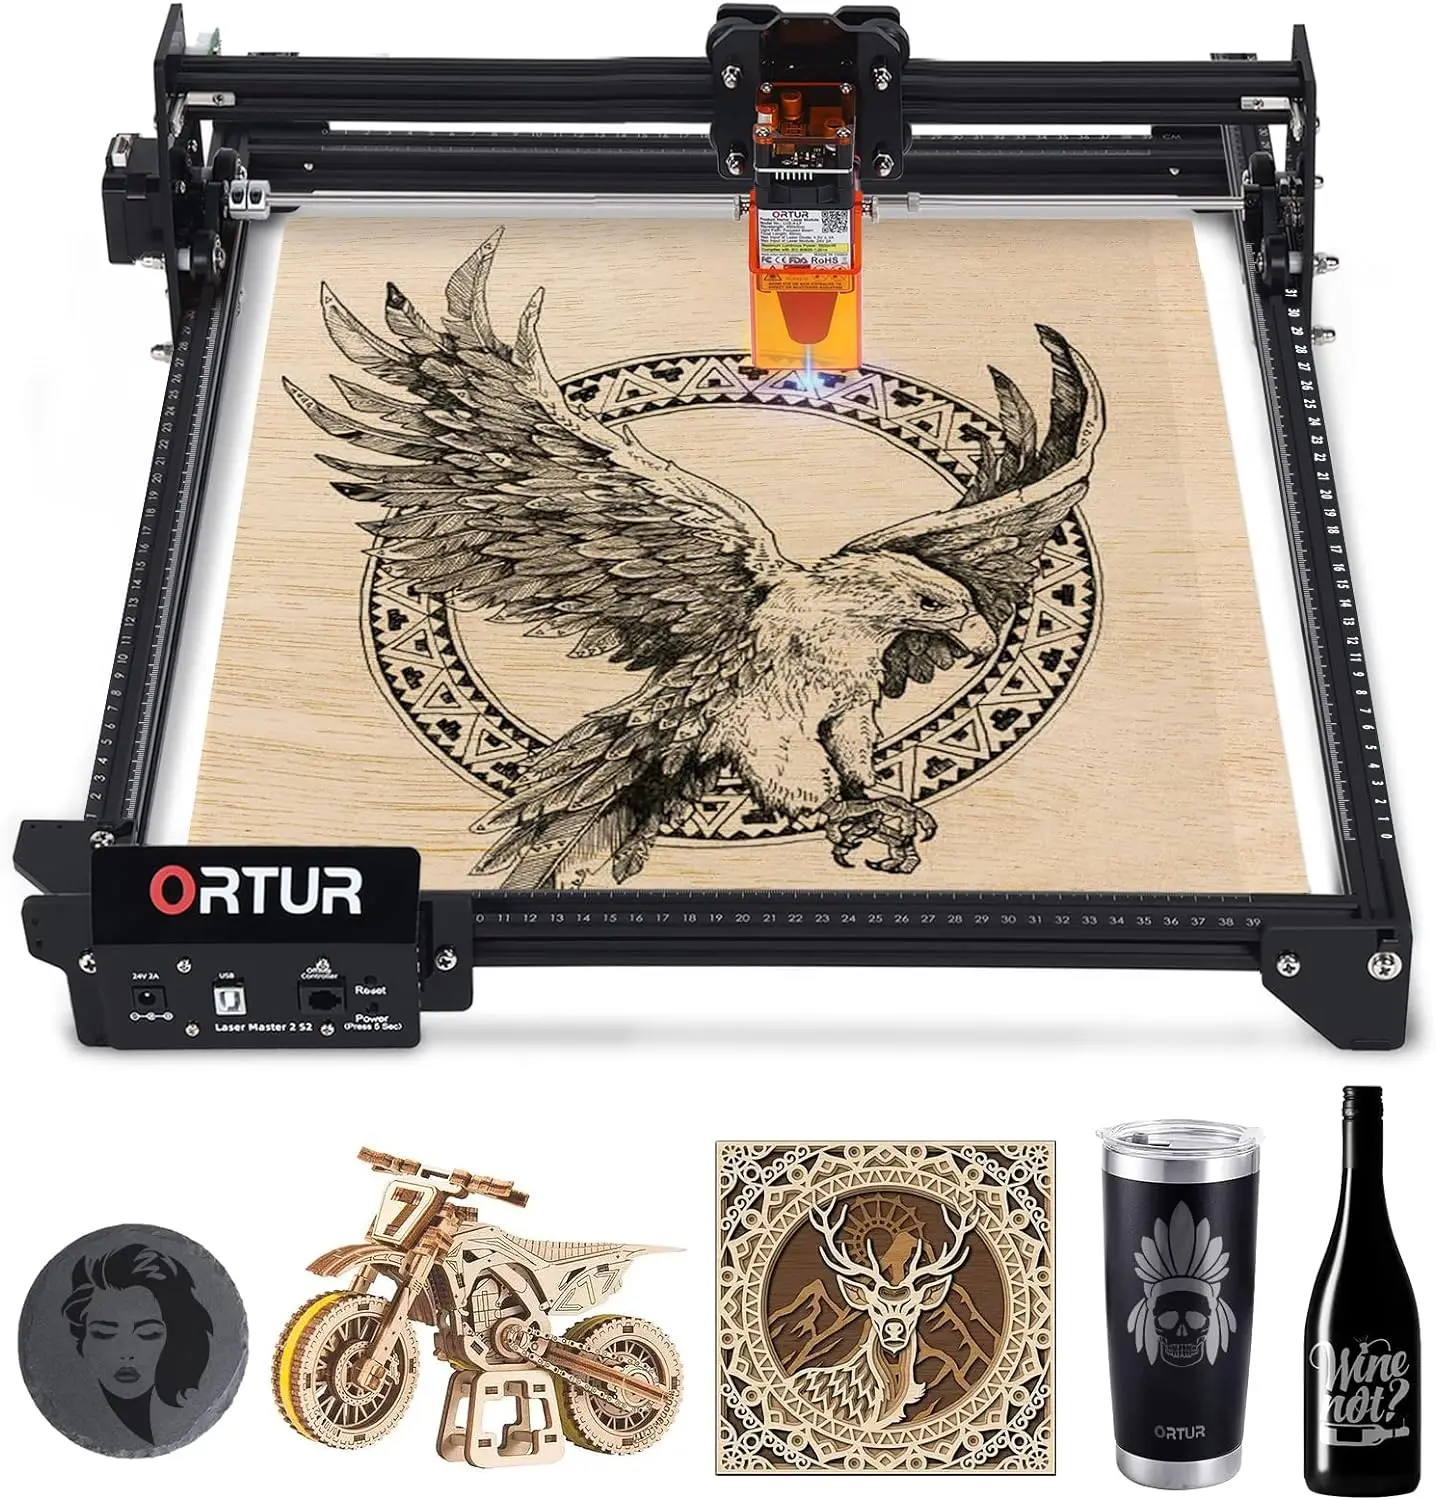 

Laser Engraver, Laser Master 2 S2 LF, 5.5W Output Laser Engraving Cutting Machine, 0.17 * 0.25mm Fixed-Focus Compressed